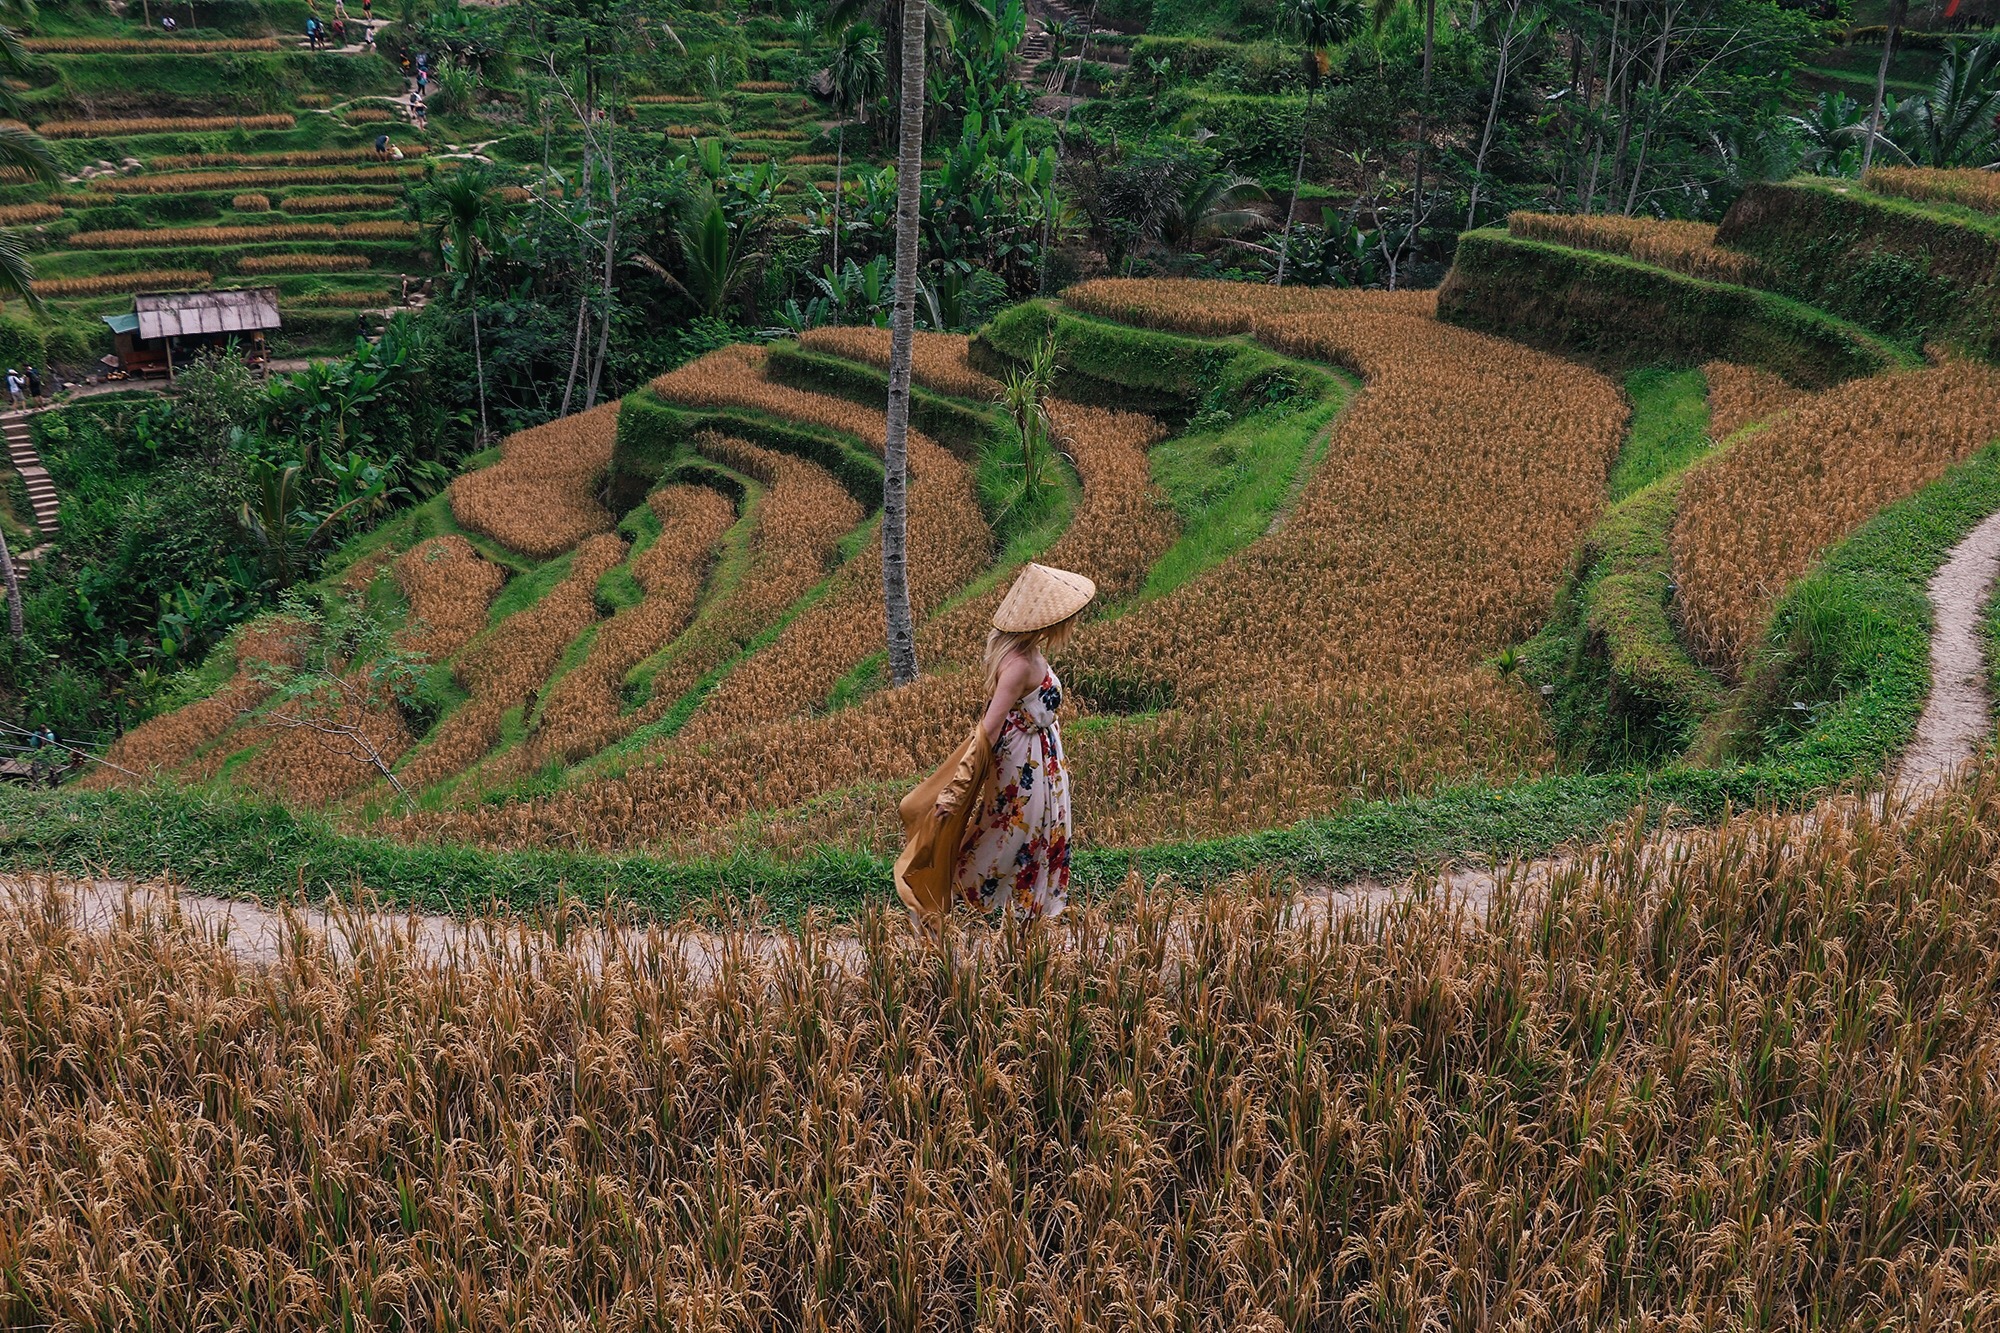 Tegallalang Rice Terraces in Ubud